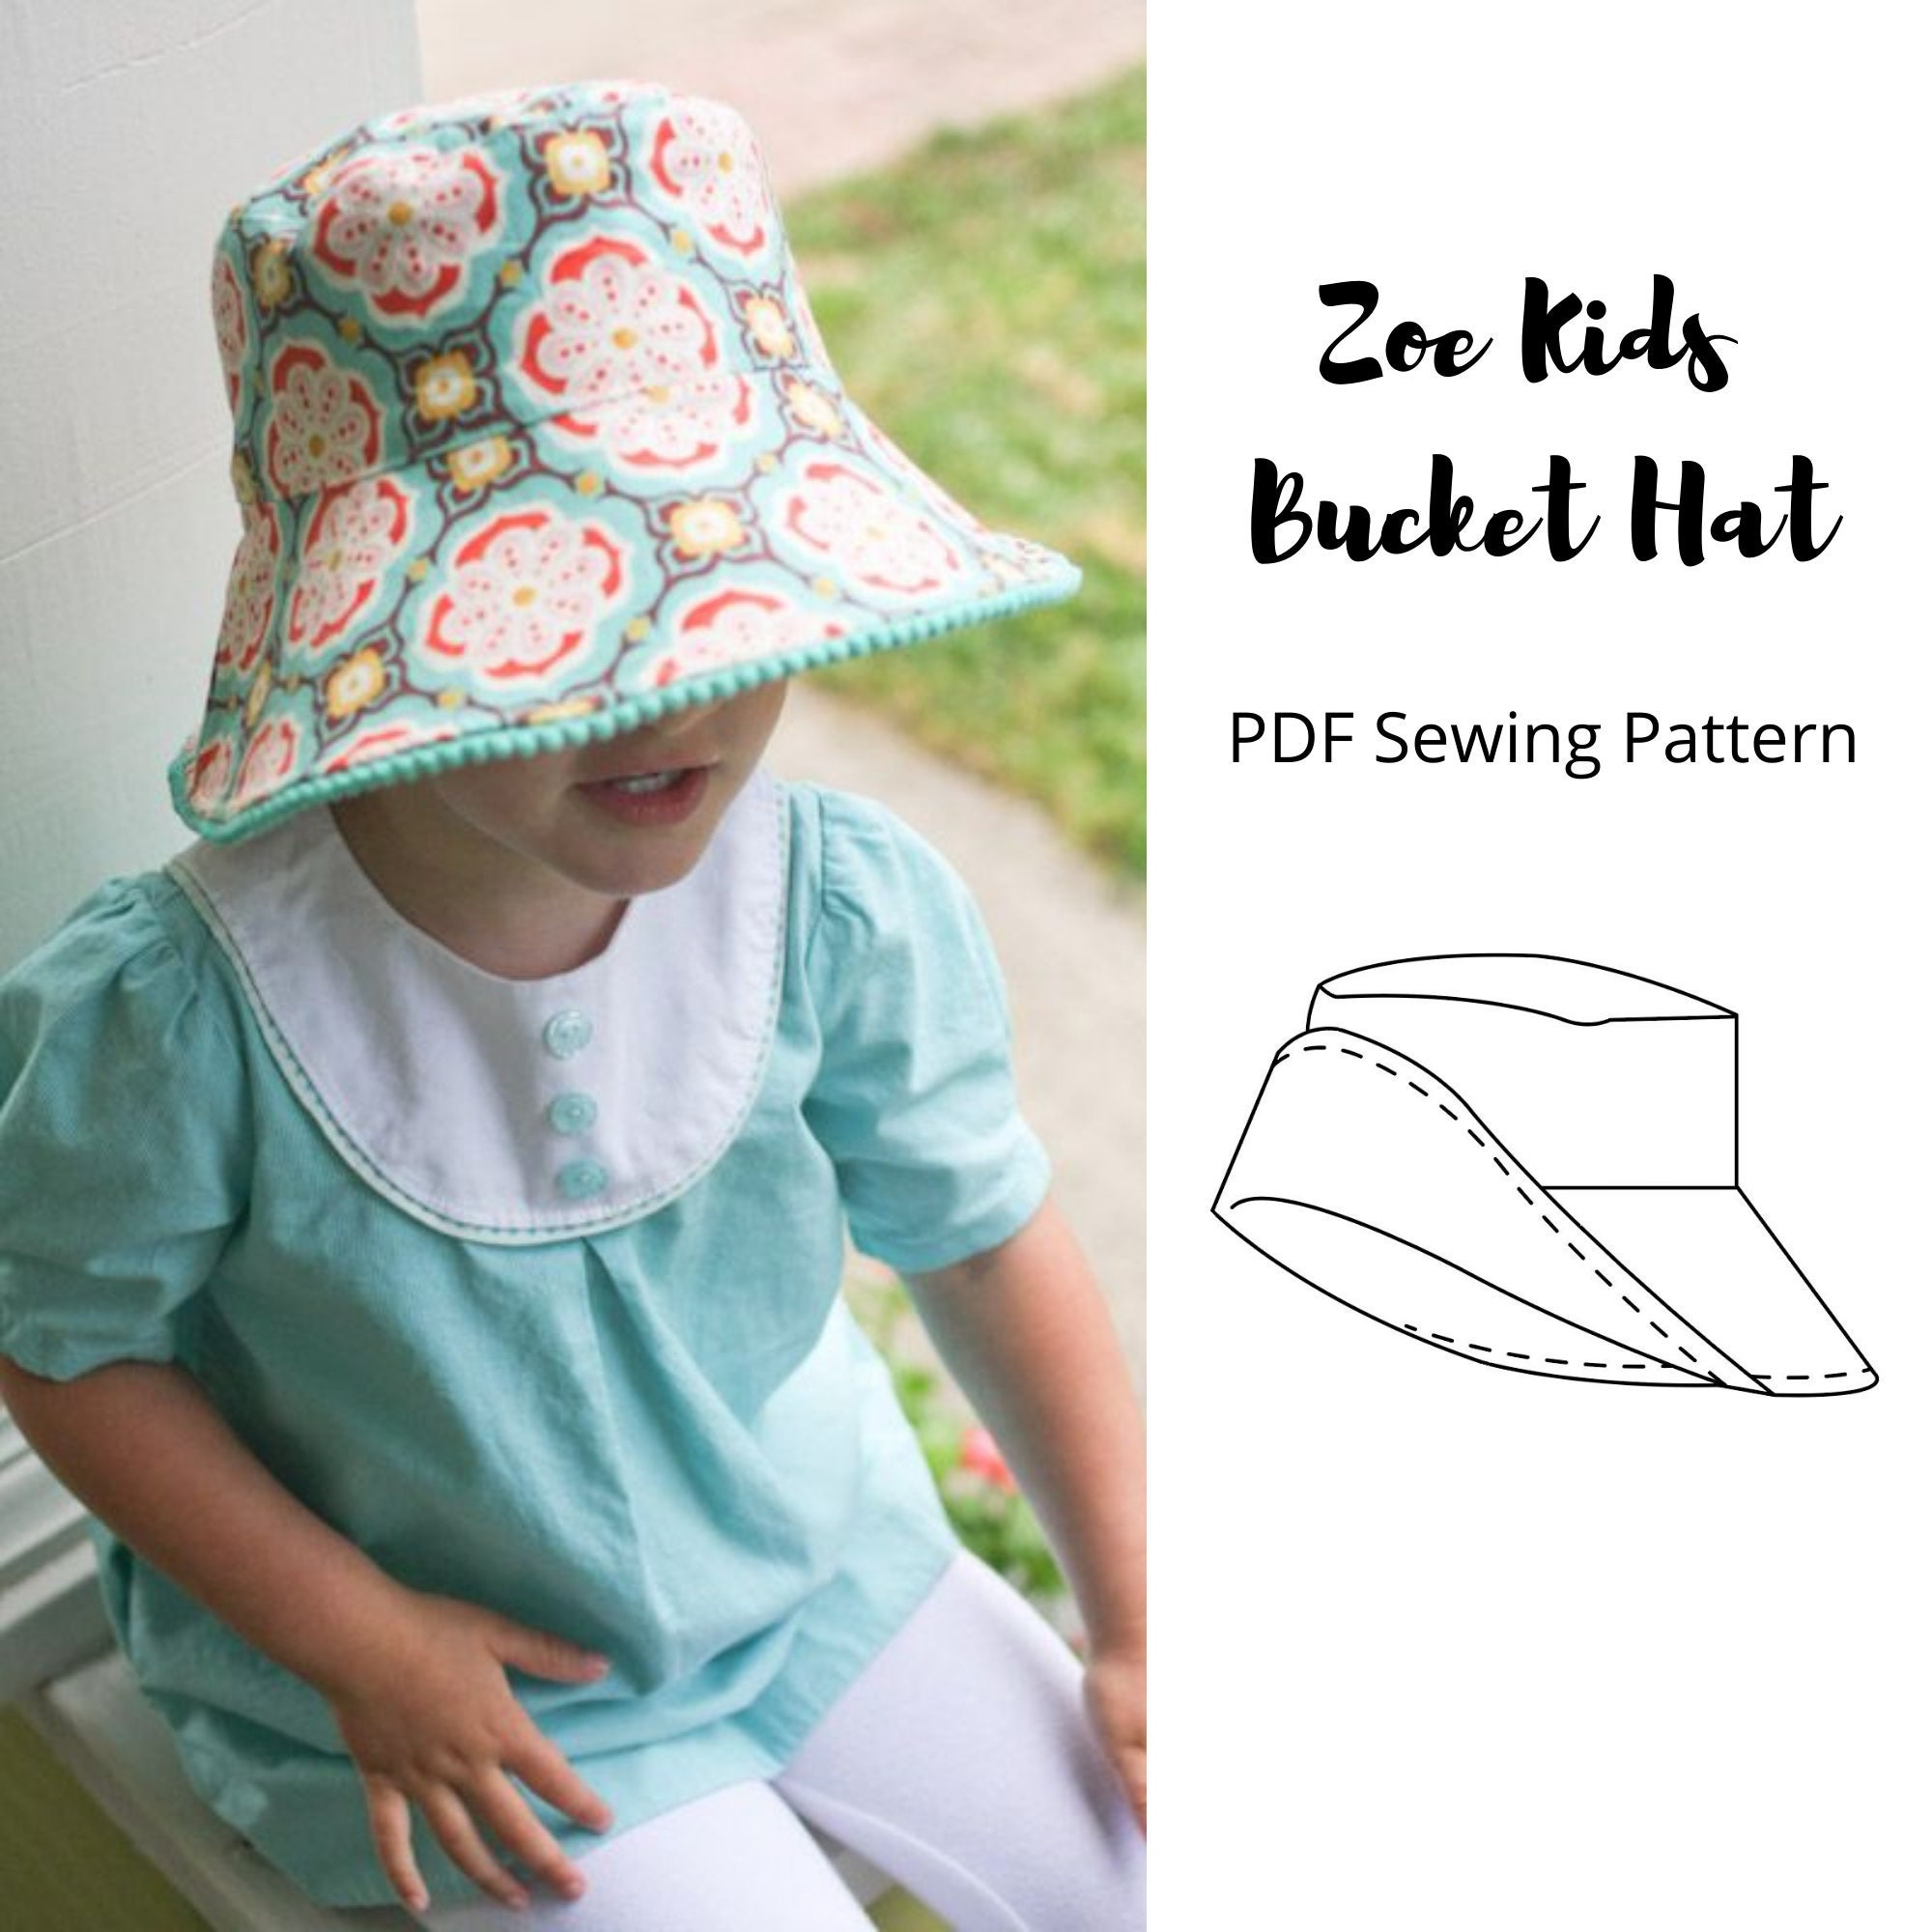 Adorable Bucket Hat for Children fits Head 20 Digital PDF Sewing Pattern -   Hong Kong